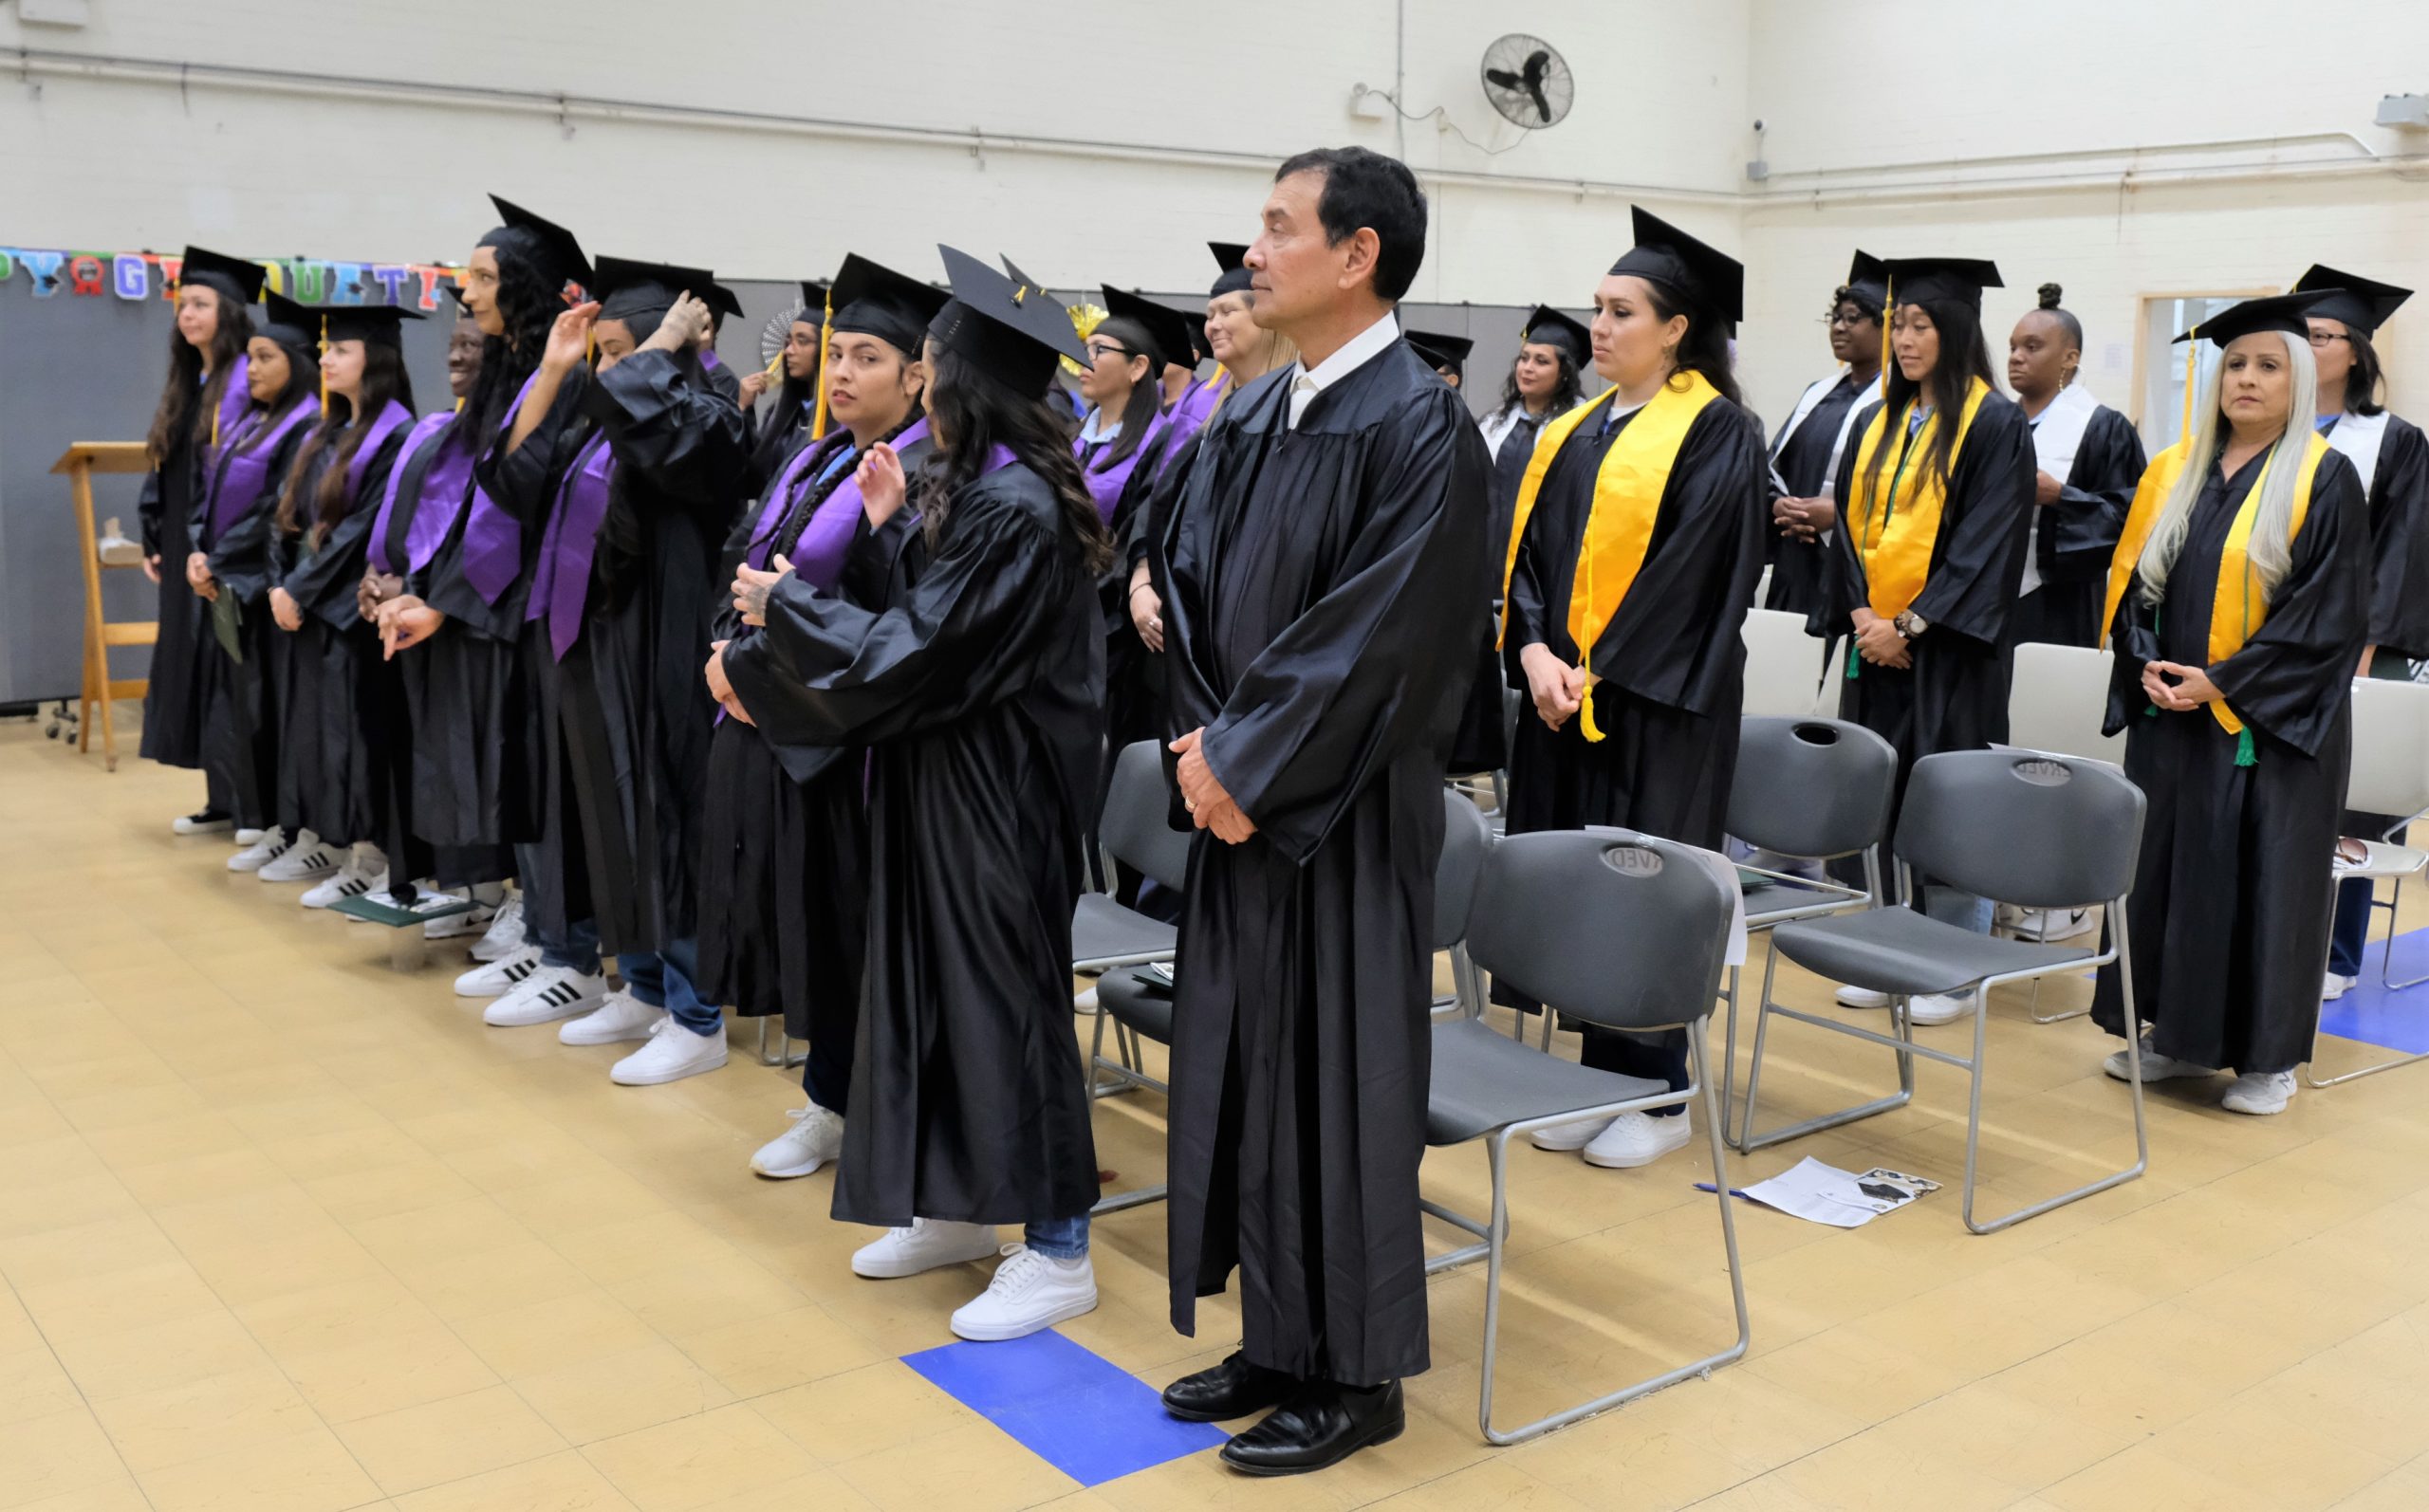 Graduates wear caps and gowns in a ceremony in CIW.